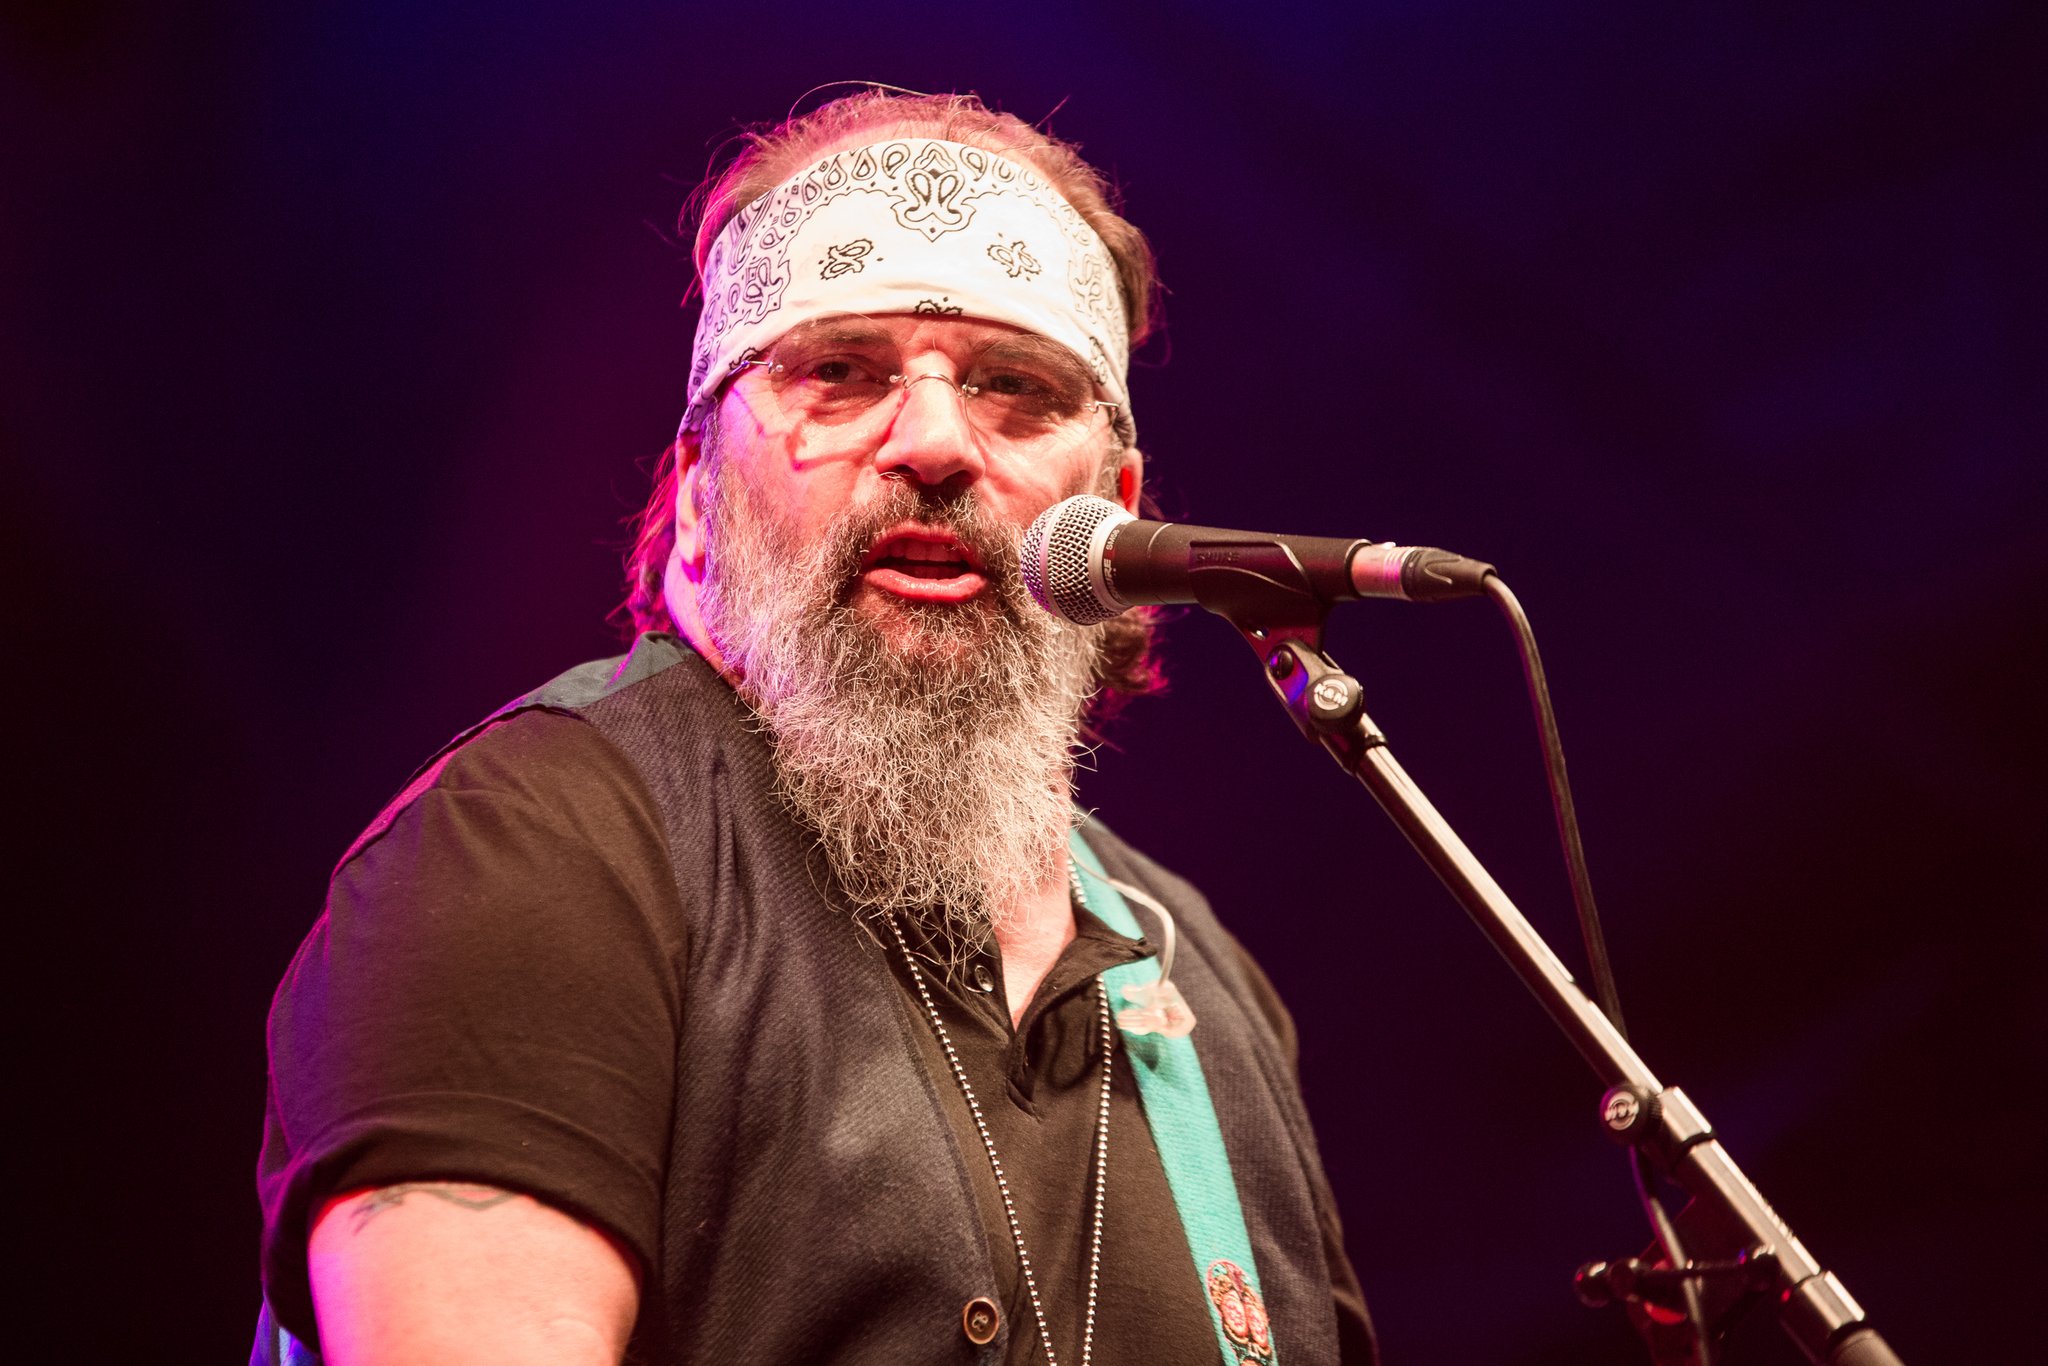 Please join me here at in wishing the one and only Steve Earle a very Happy 66th Birthday today  